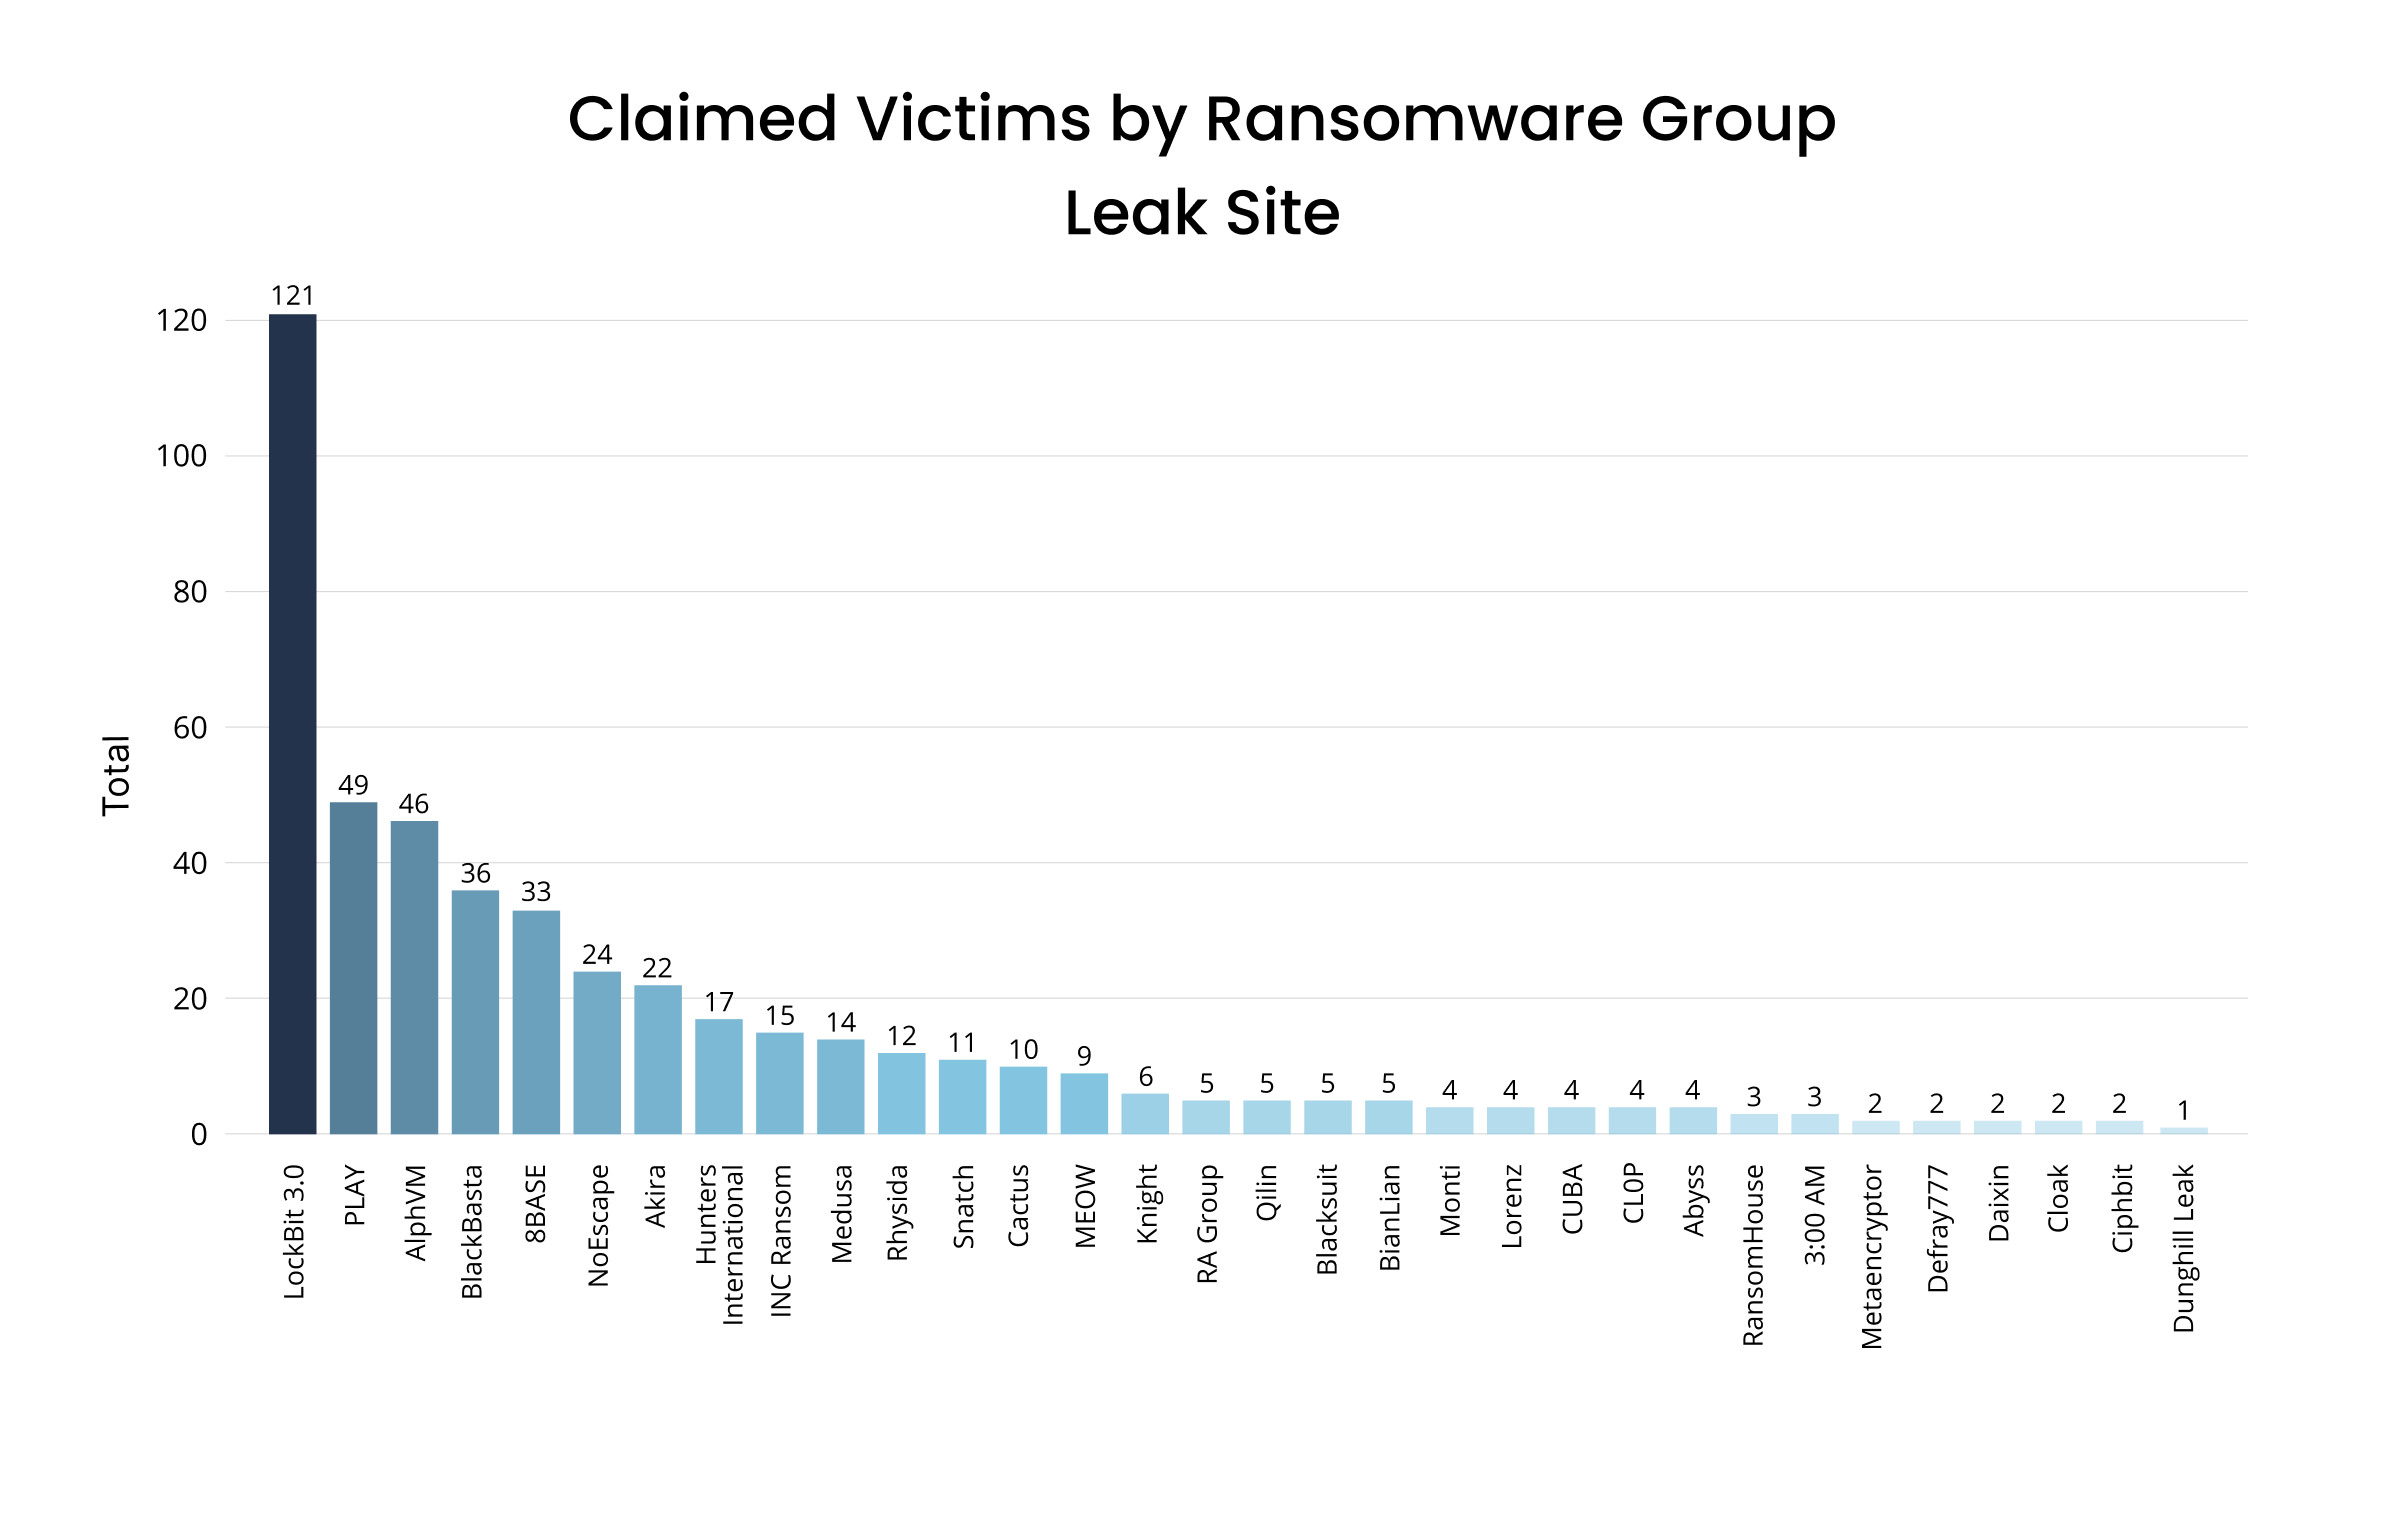 [BAR GRAPH] Claimed Victims by Ransomware Groups Leak Sites